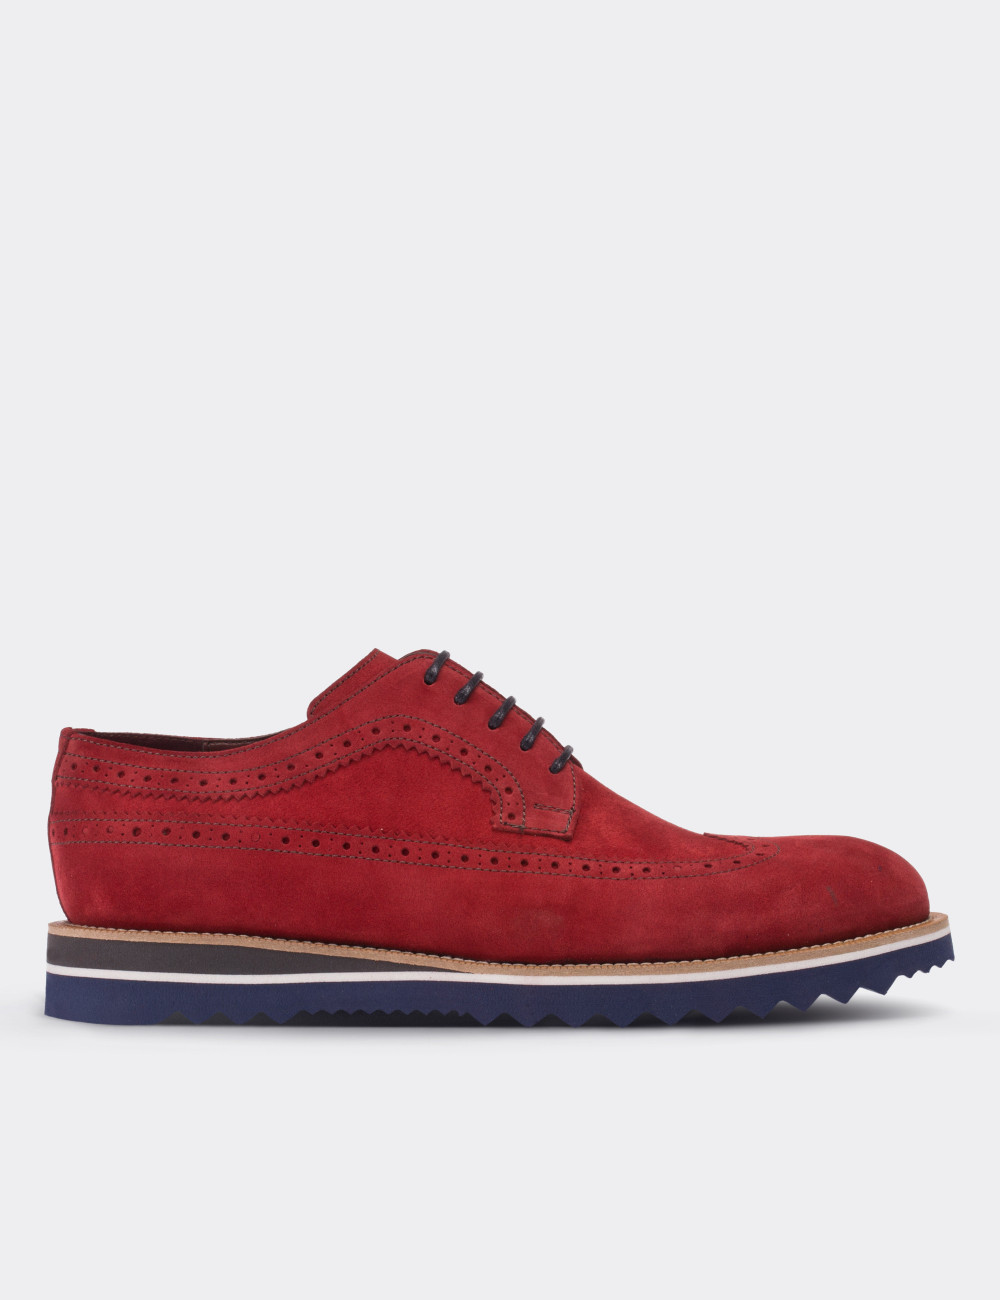 Red Suede Leather Lace-up Shoes - 01293MKRME02